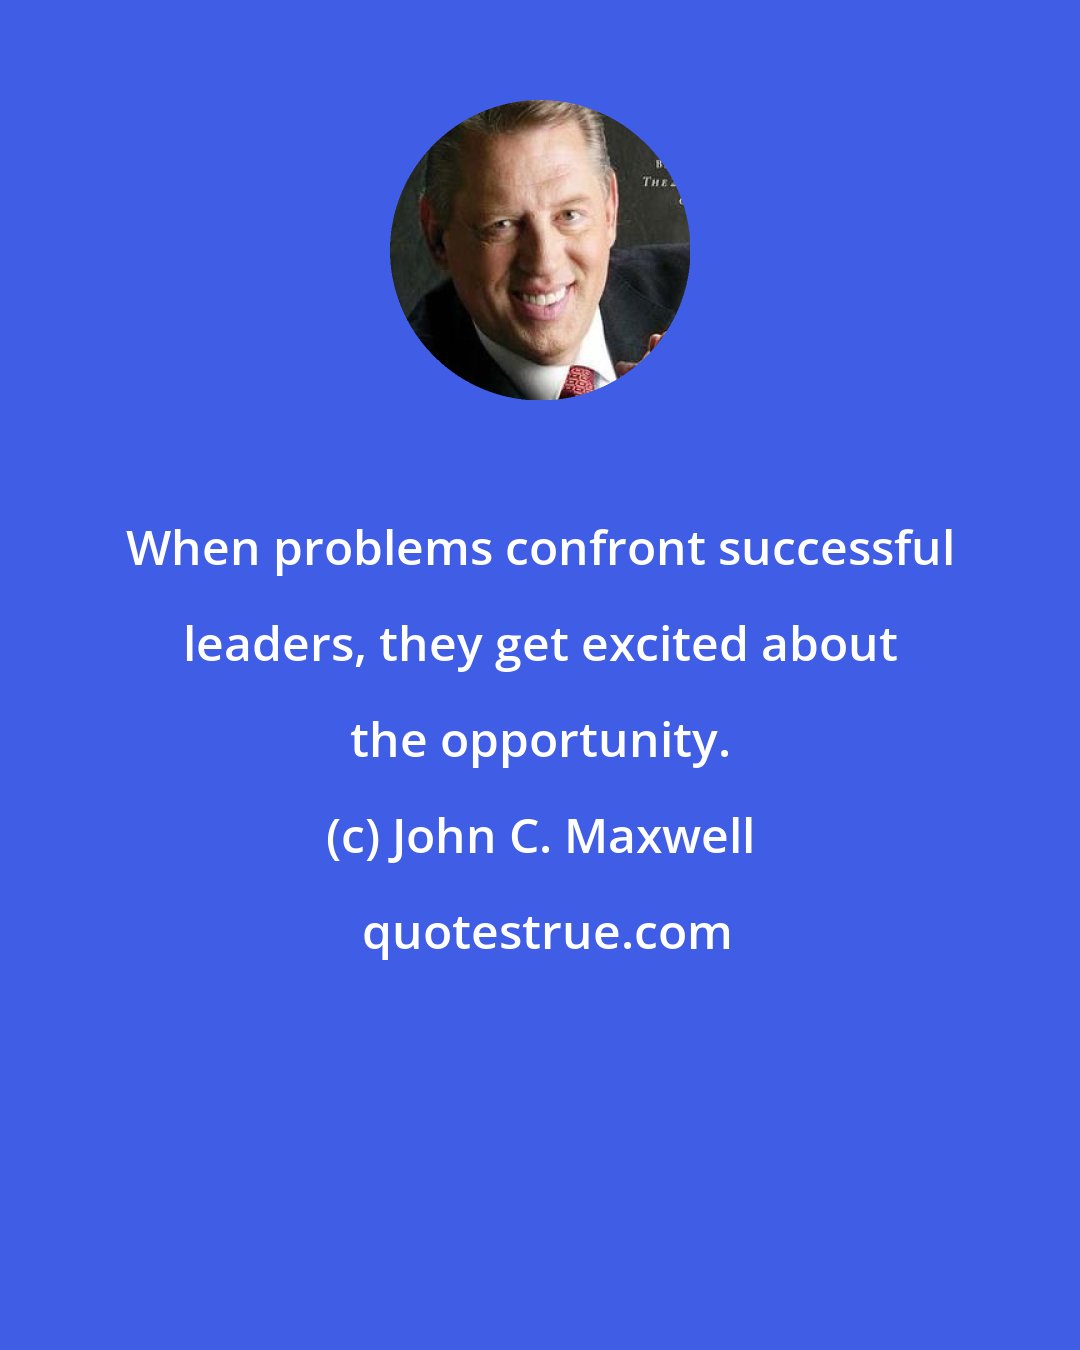 John C. Maxwell: When problems confront successful leaders, they get excited about the opportunity.